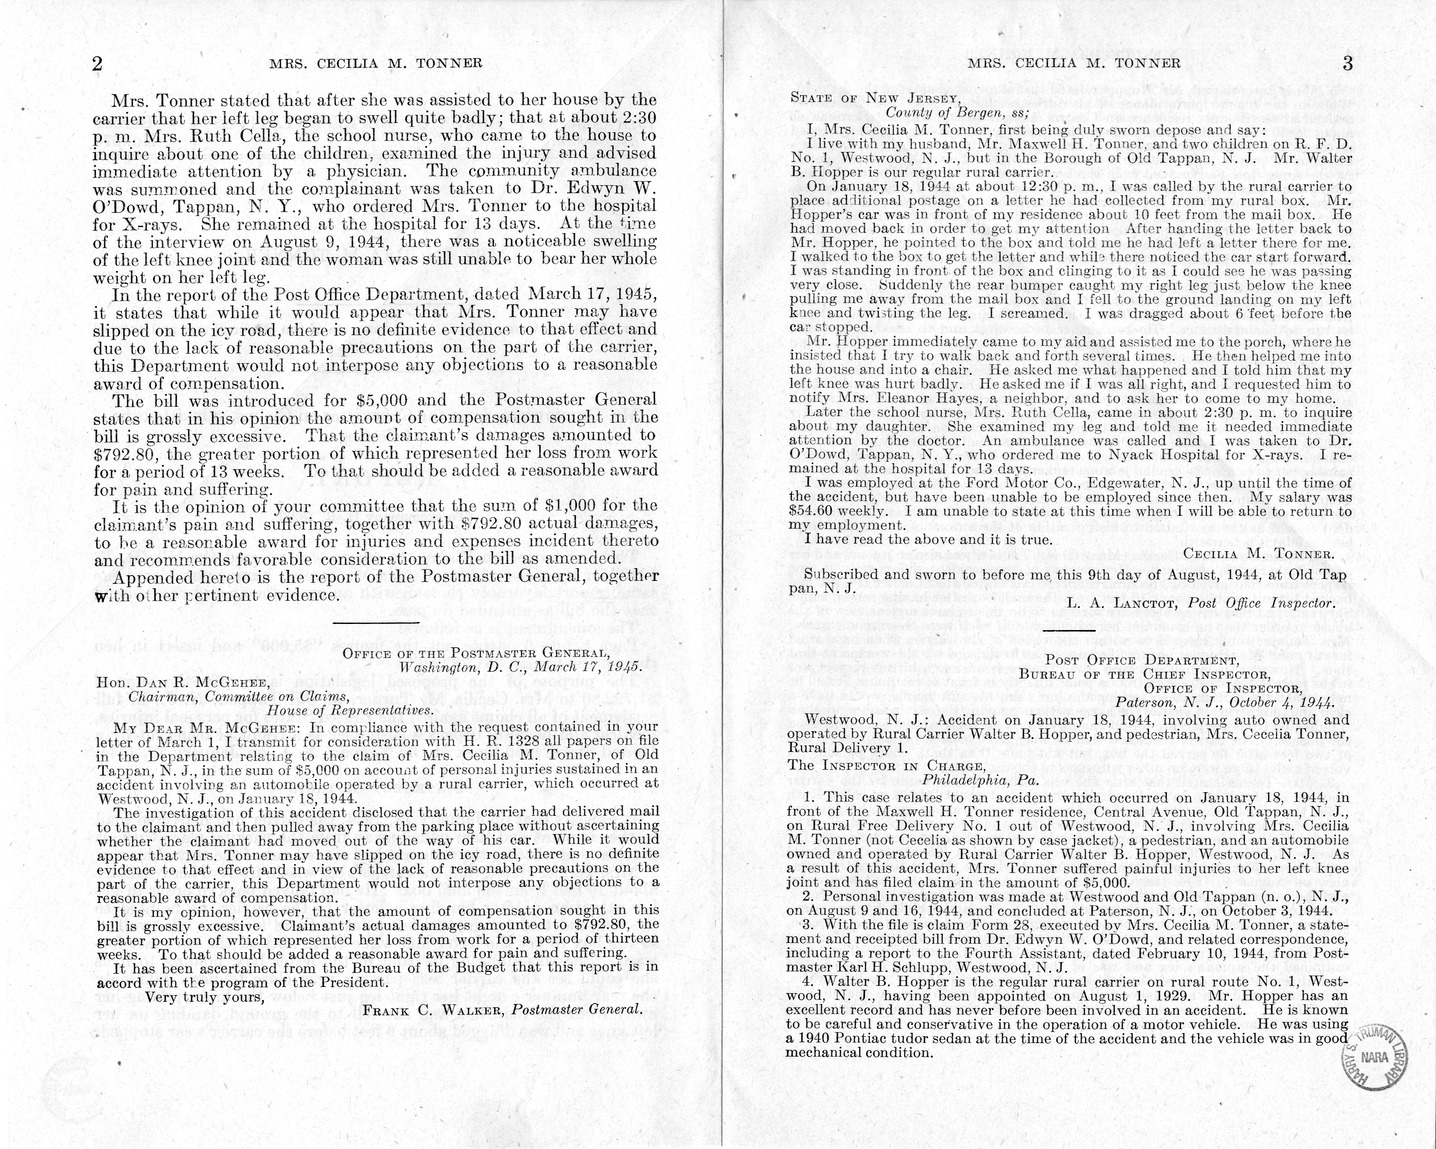 Memorandum from Frederick J. Bailey to M. C. Latta, H.R. 1328, For the Relief of Mrs. Cecilia M. Tonner, with Attachments